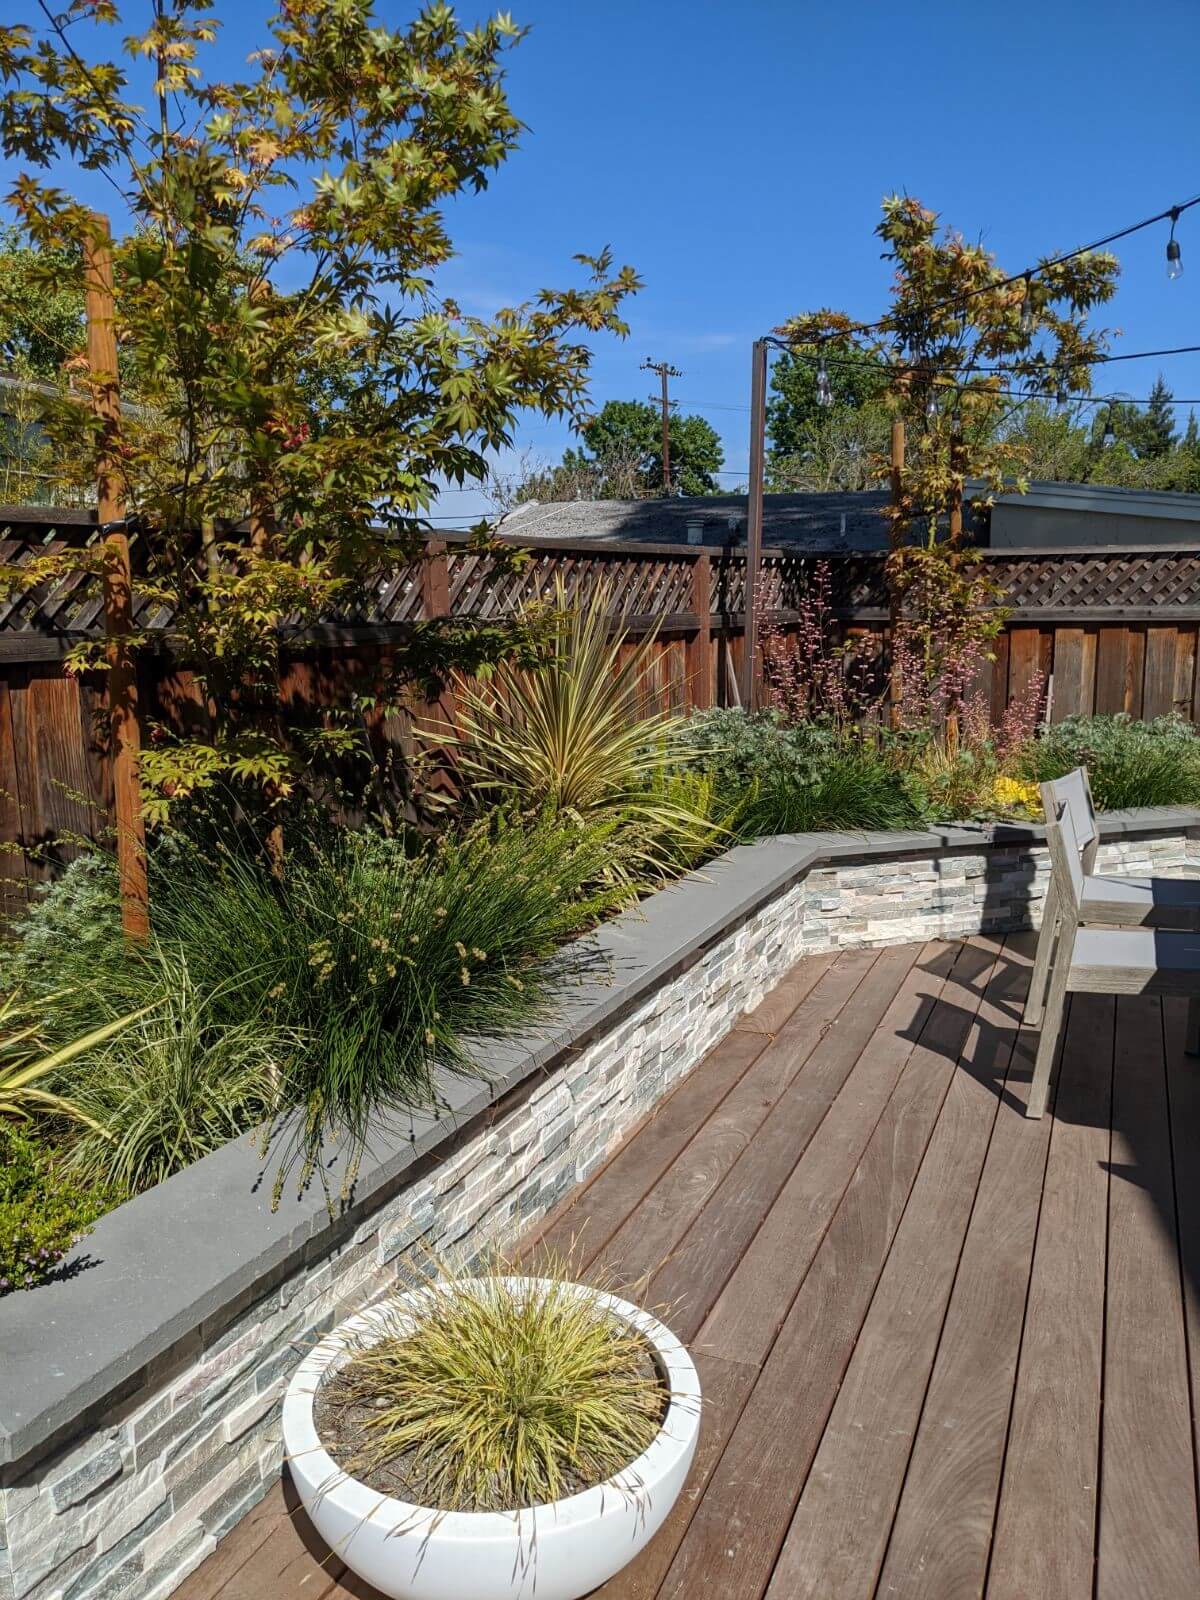 Stone knee wall surrounding wooden deck with natural grasses and plantings